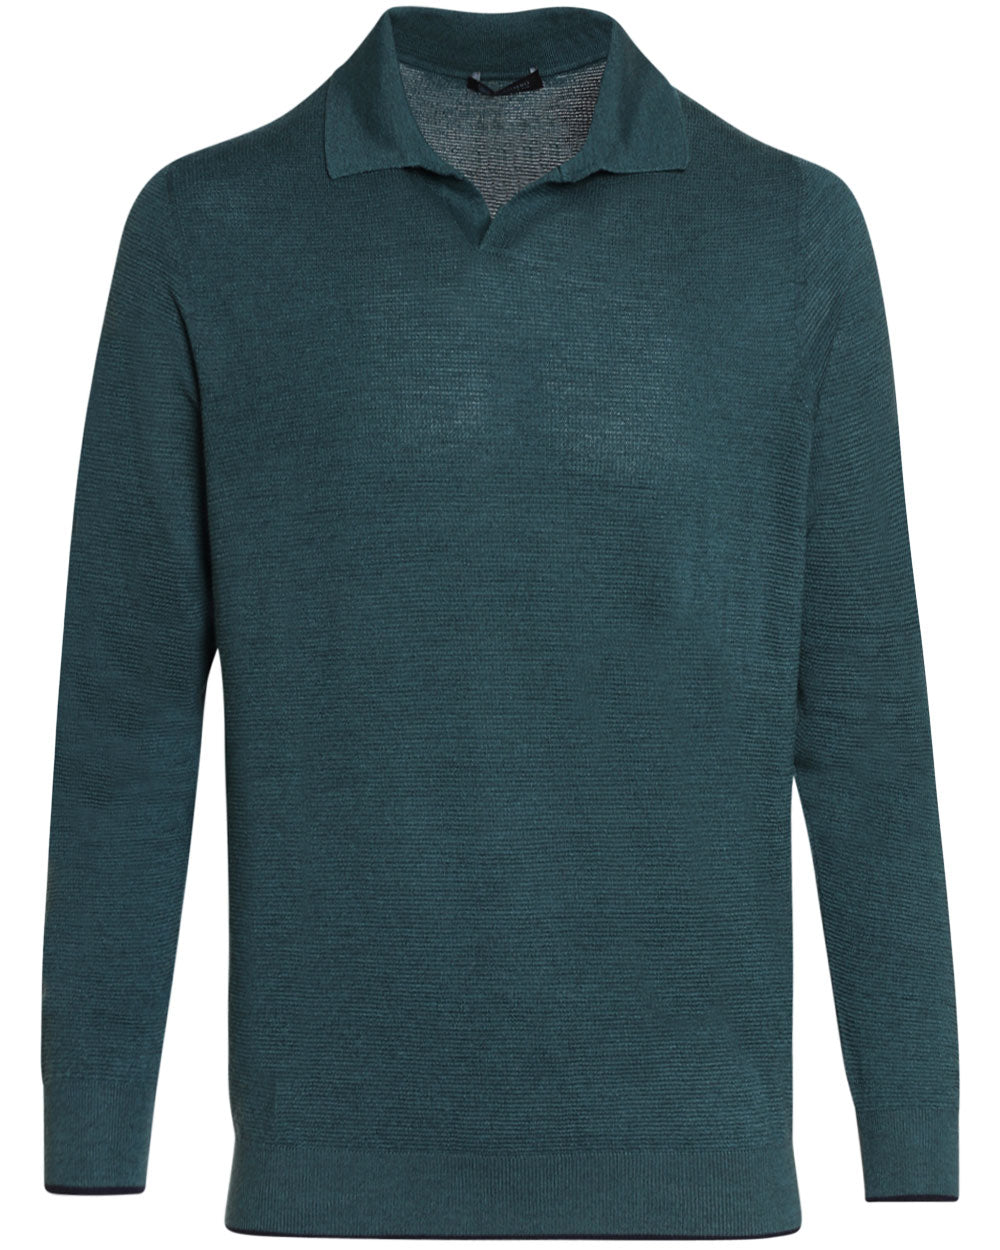 Green and Navy Cashmere Blend Textured Long Sleeve Polo